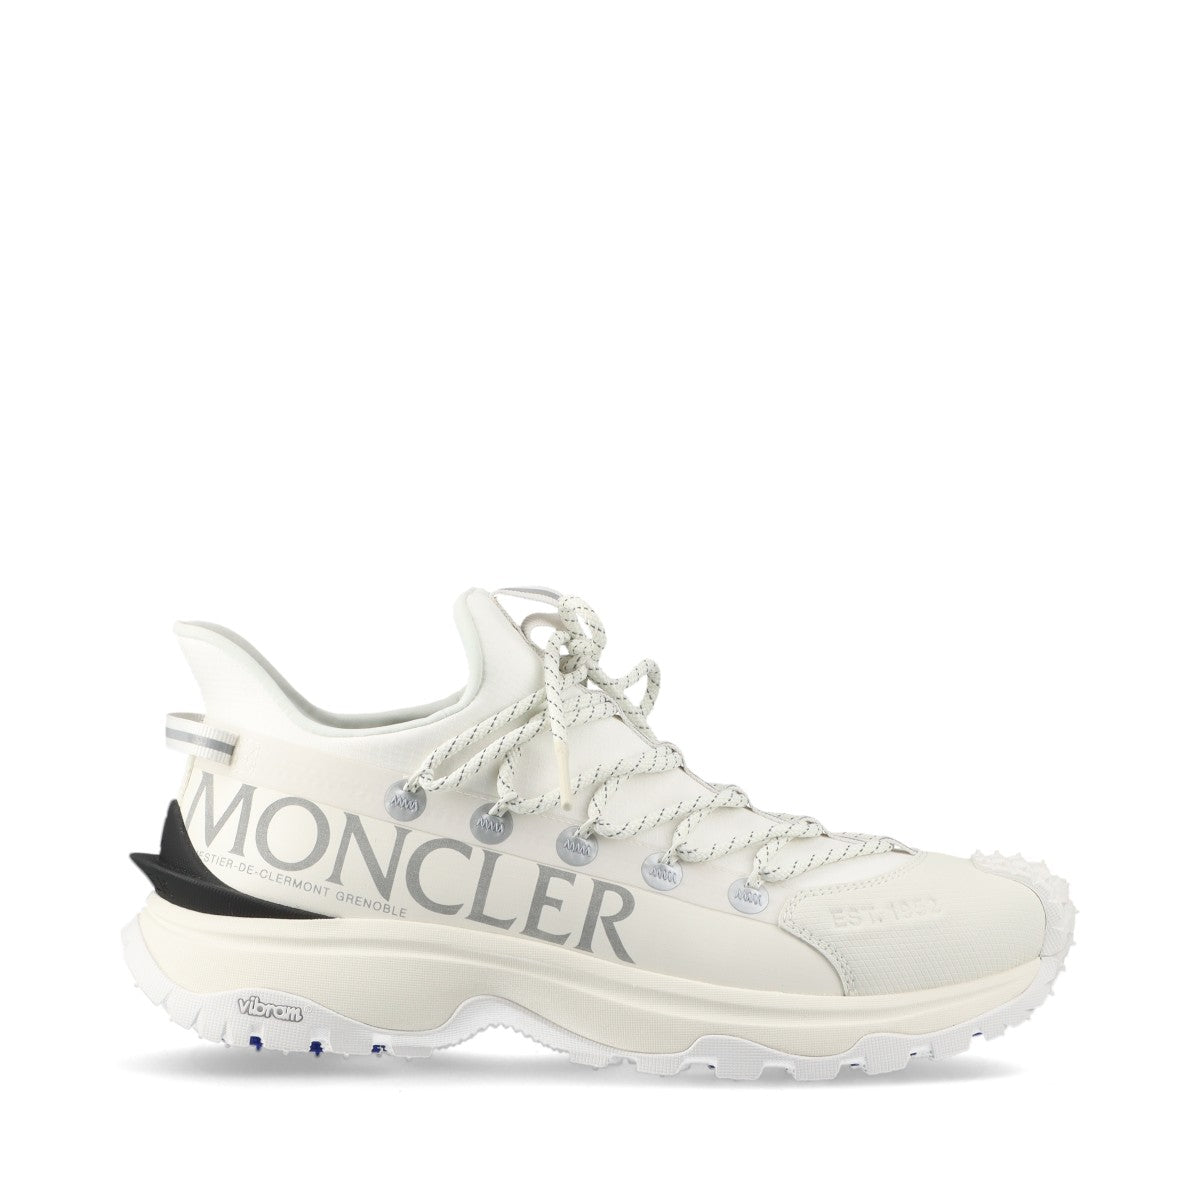 Moncler Trailgrip Lite 2 23AW Fabric Sneakers 42 Men's Gray x white vibram sole Box There is a storage bag